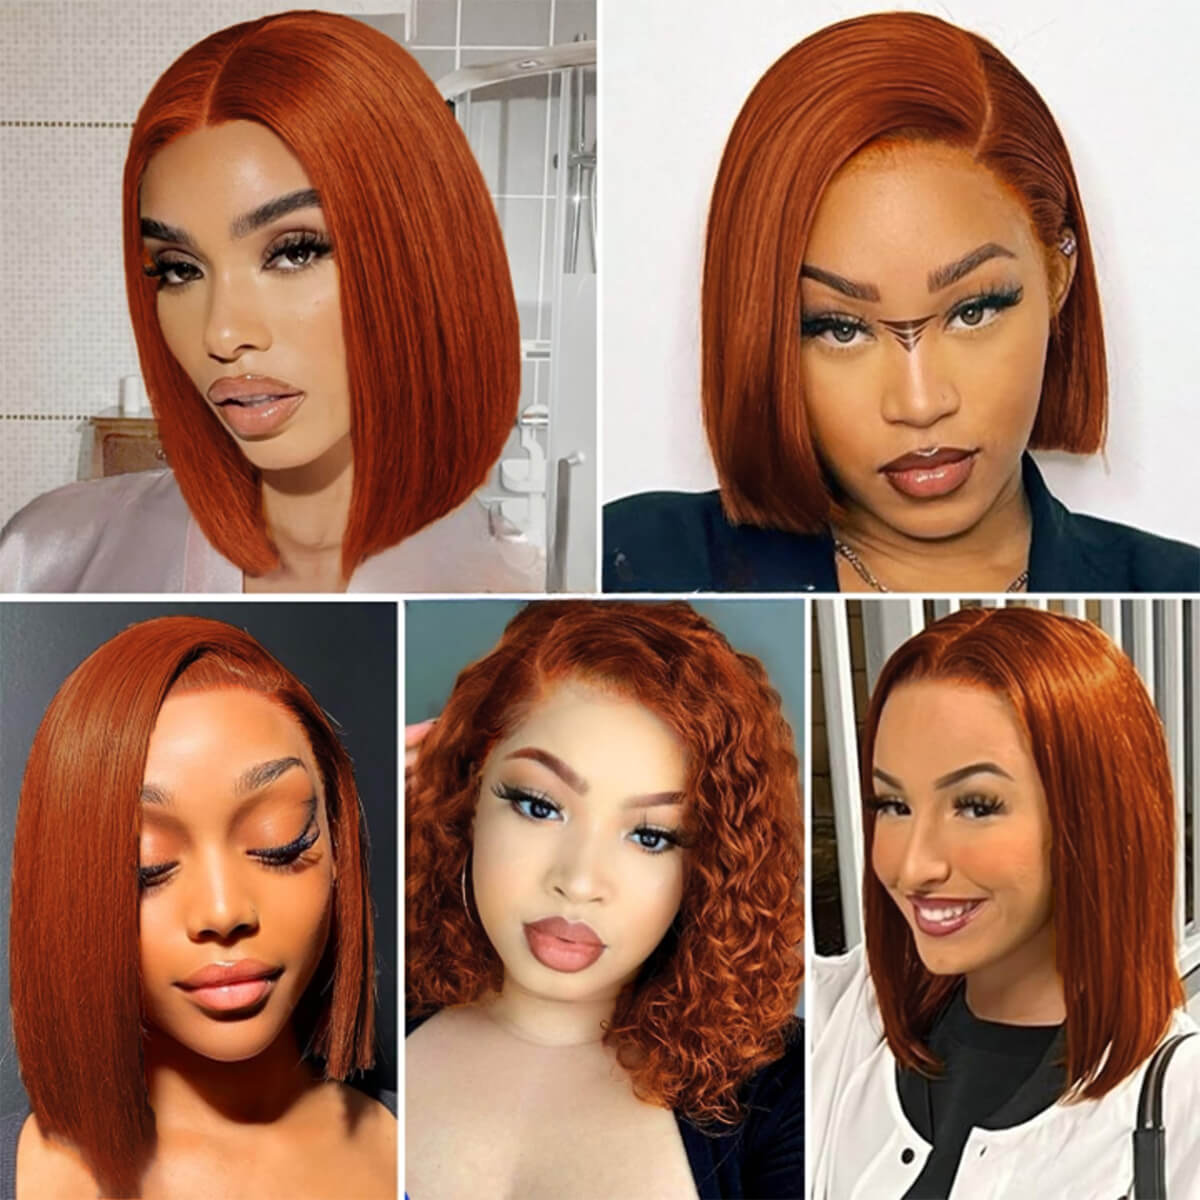 Wesface Ginger Orange Bob Wig Human Hair 13X4 Glueless Wigs Human Hair Pre Plucked Natural Hairline 180% Density Straight Bob Ginger Lace Front Wigs Human Hair for Women Short Bob Wig